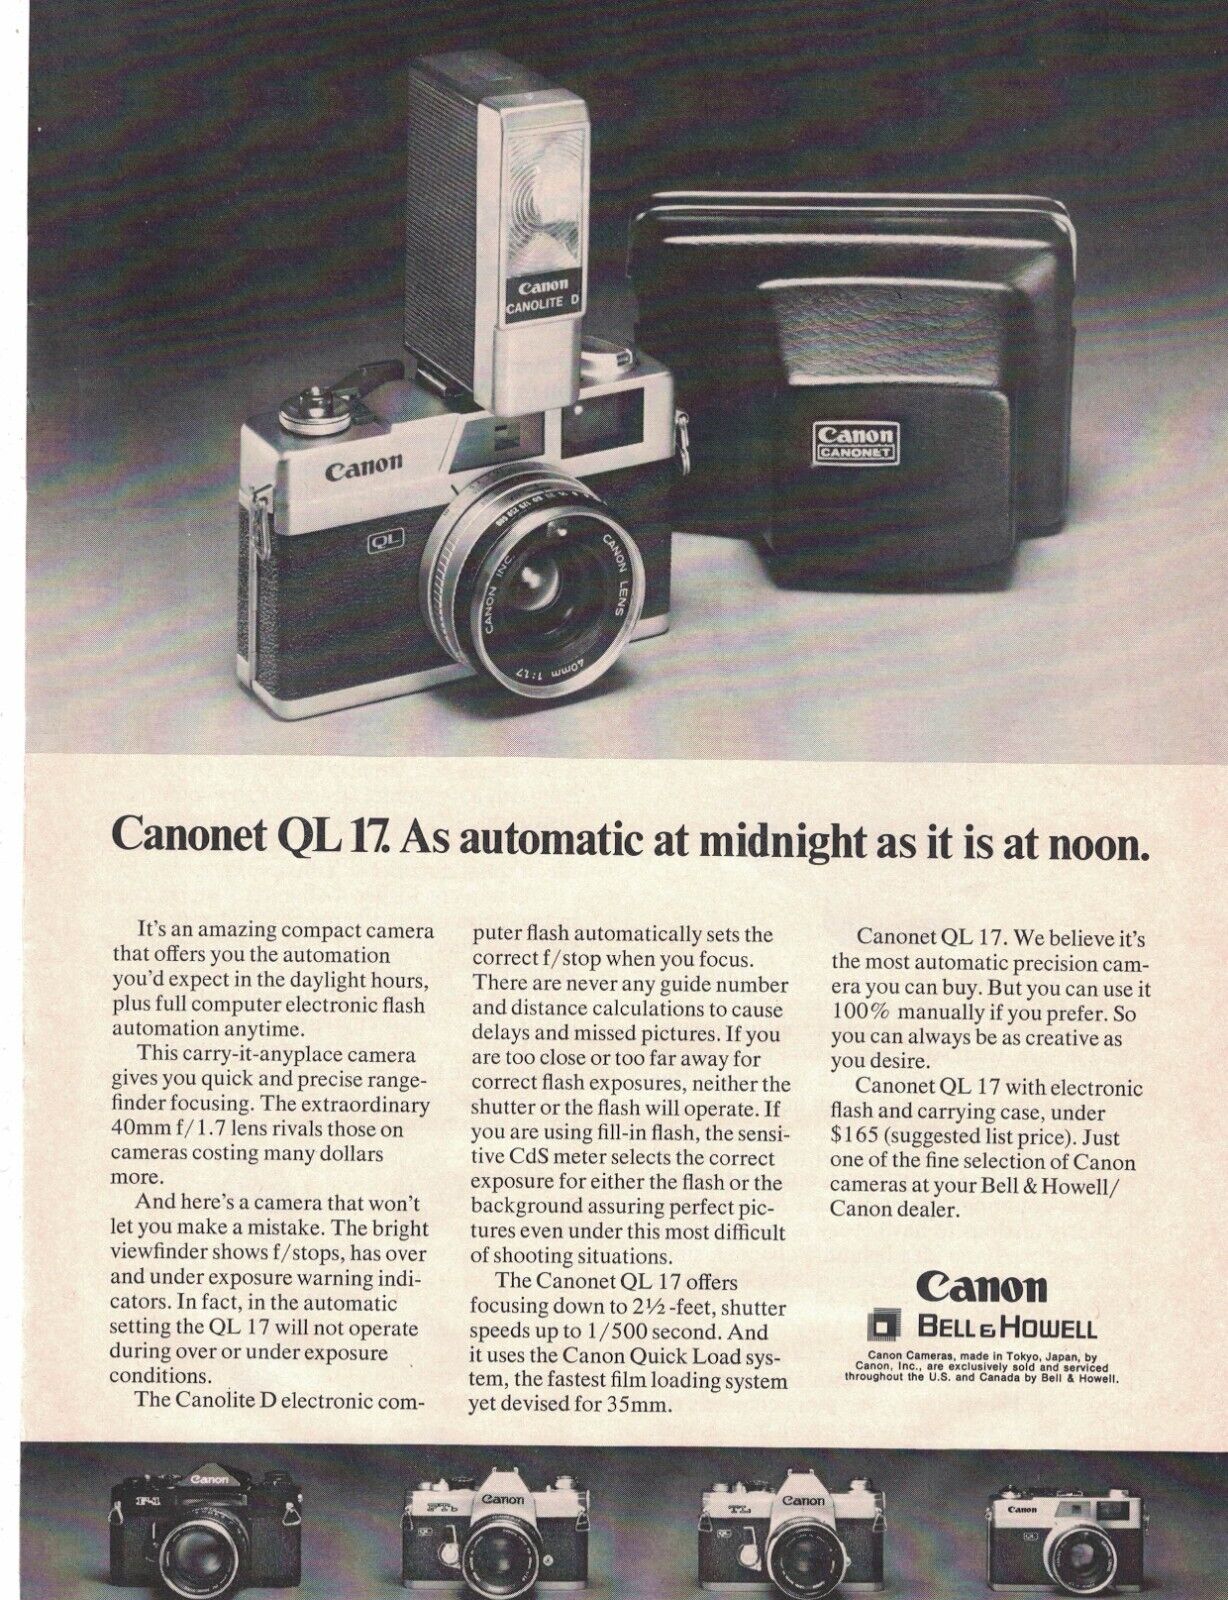 Canonet QL 17 Camera 1971 Vintage Magazine Print Ad Canon Bell Howell automatic